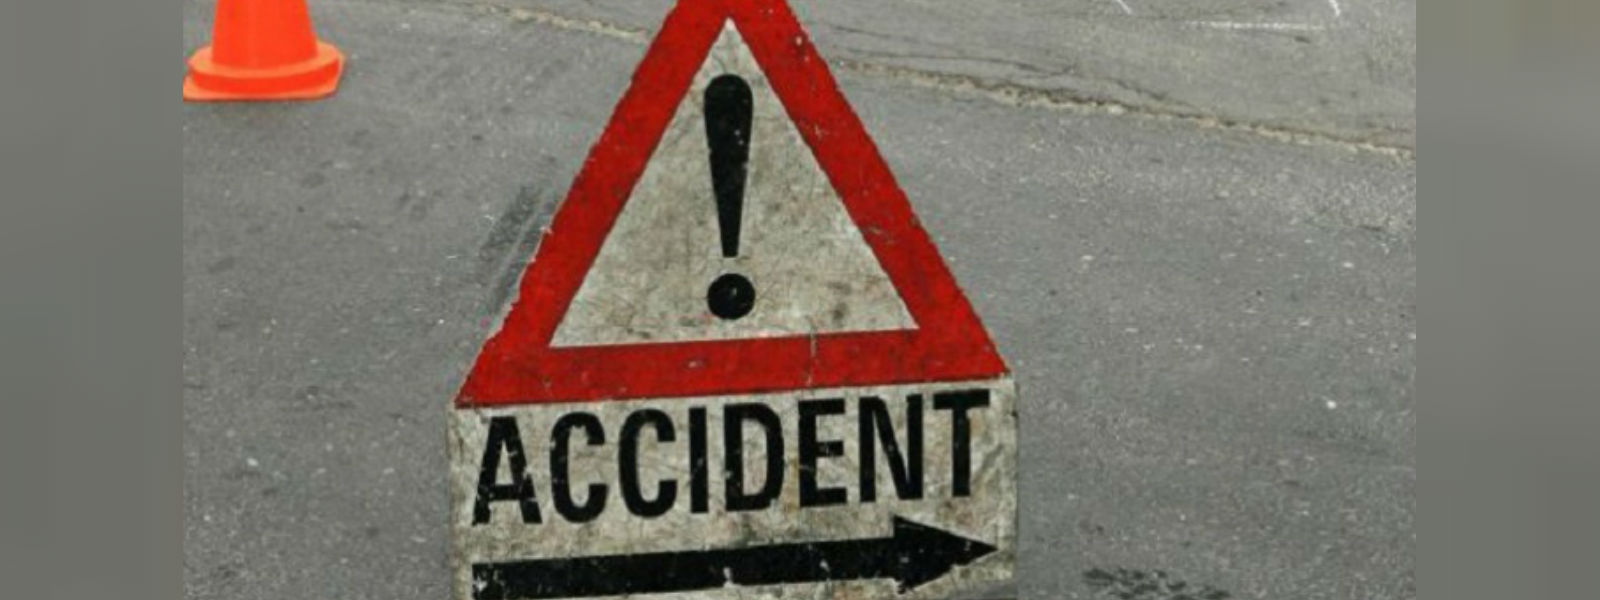 Two motorcyclists die in accidents